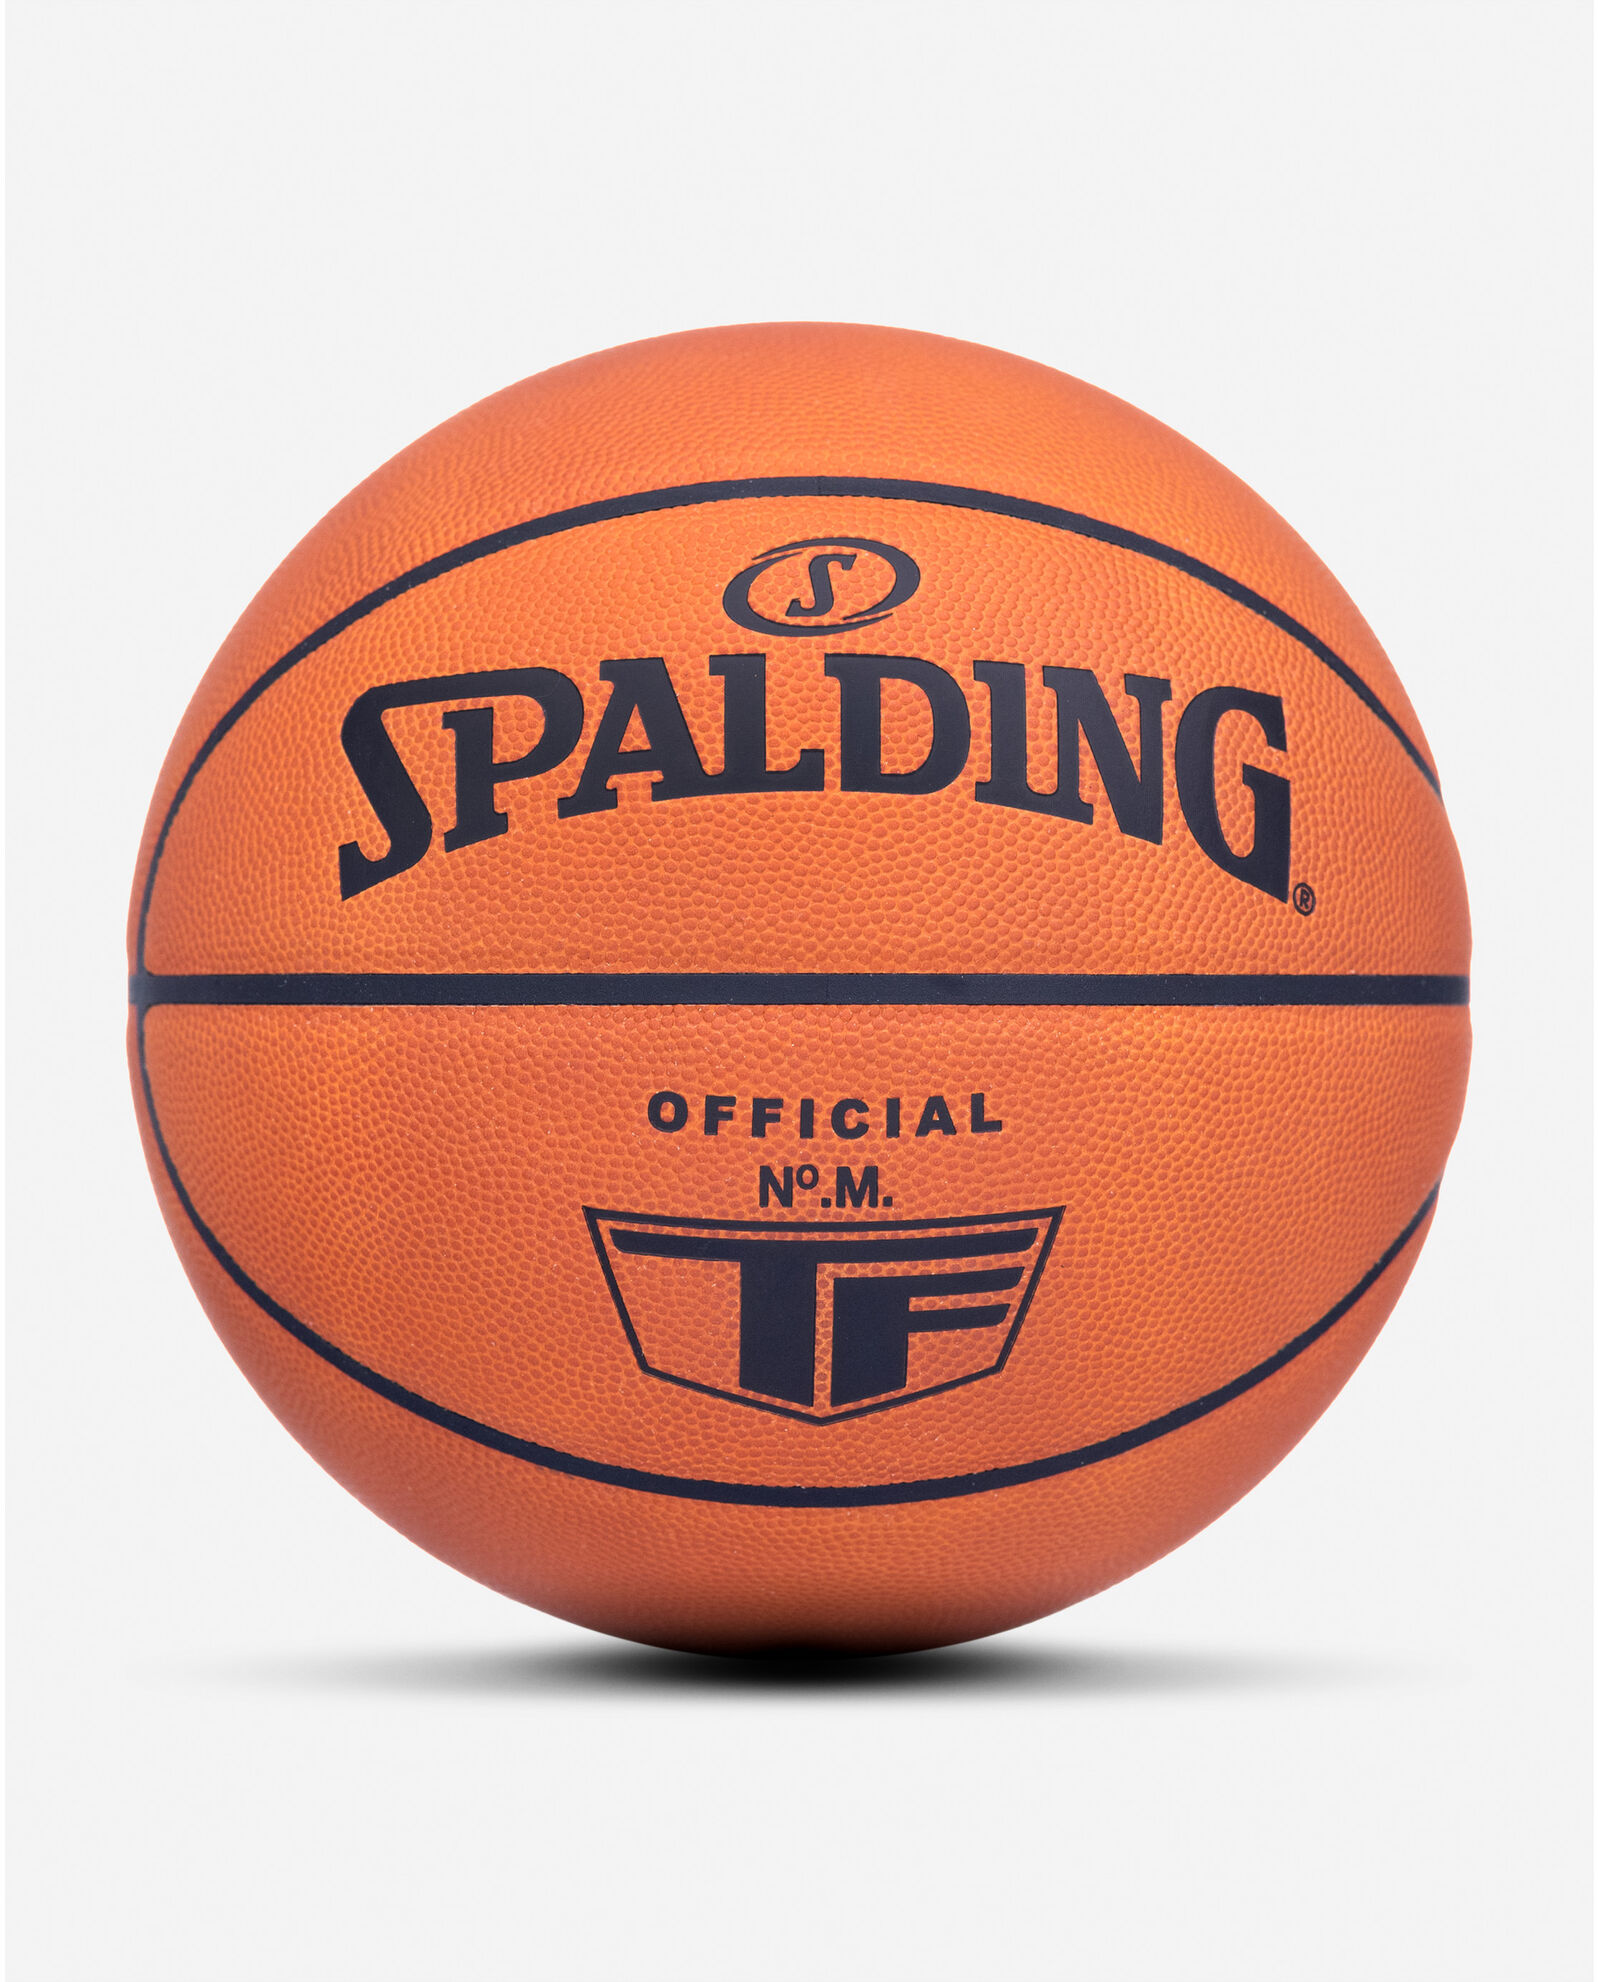 Basket-Center: Basketball equipment and accessories